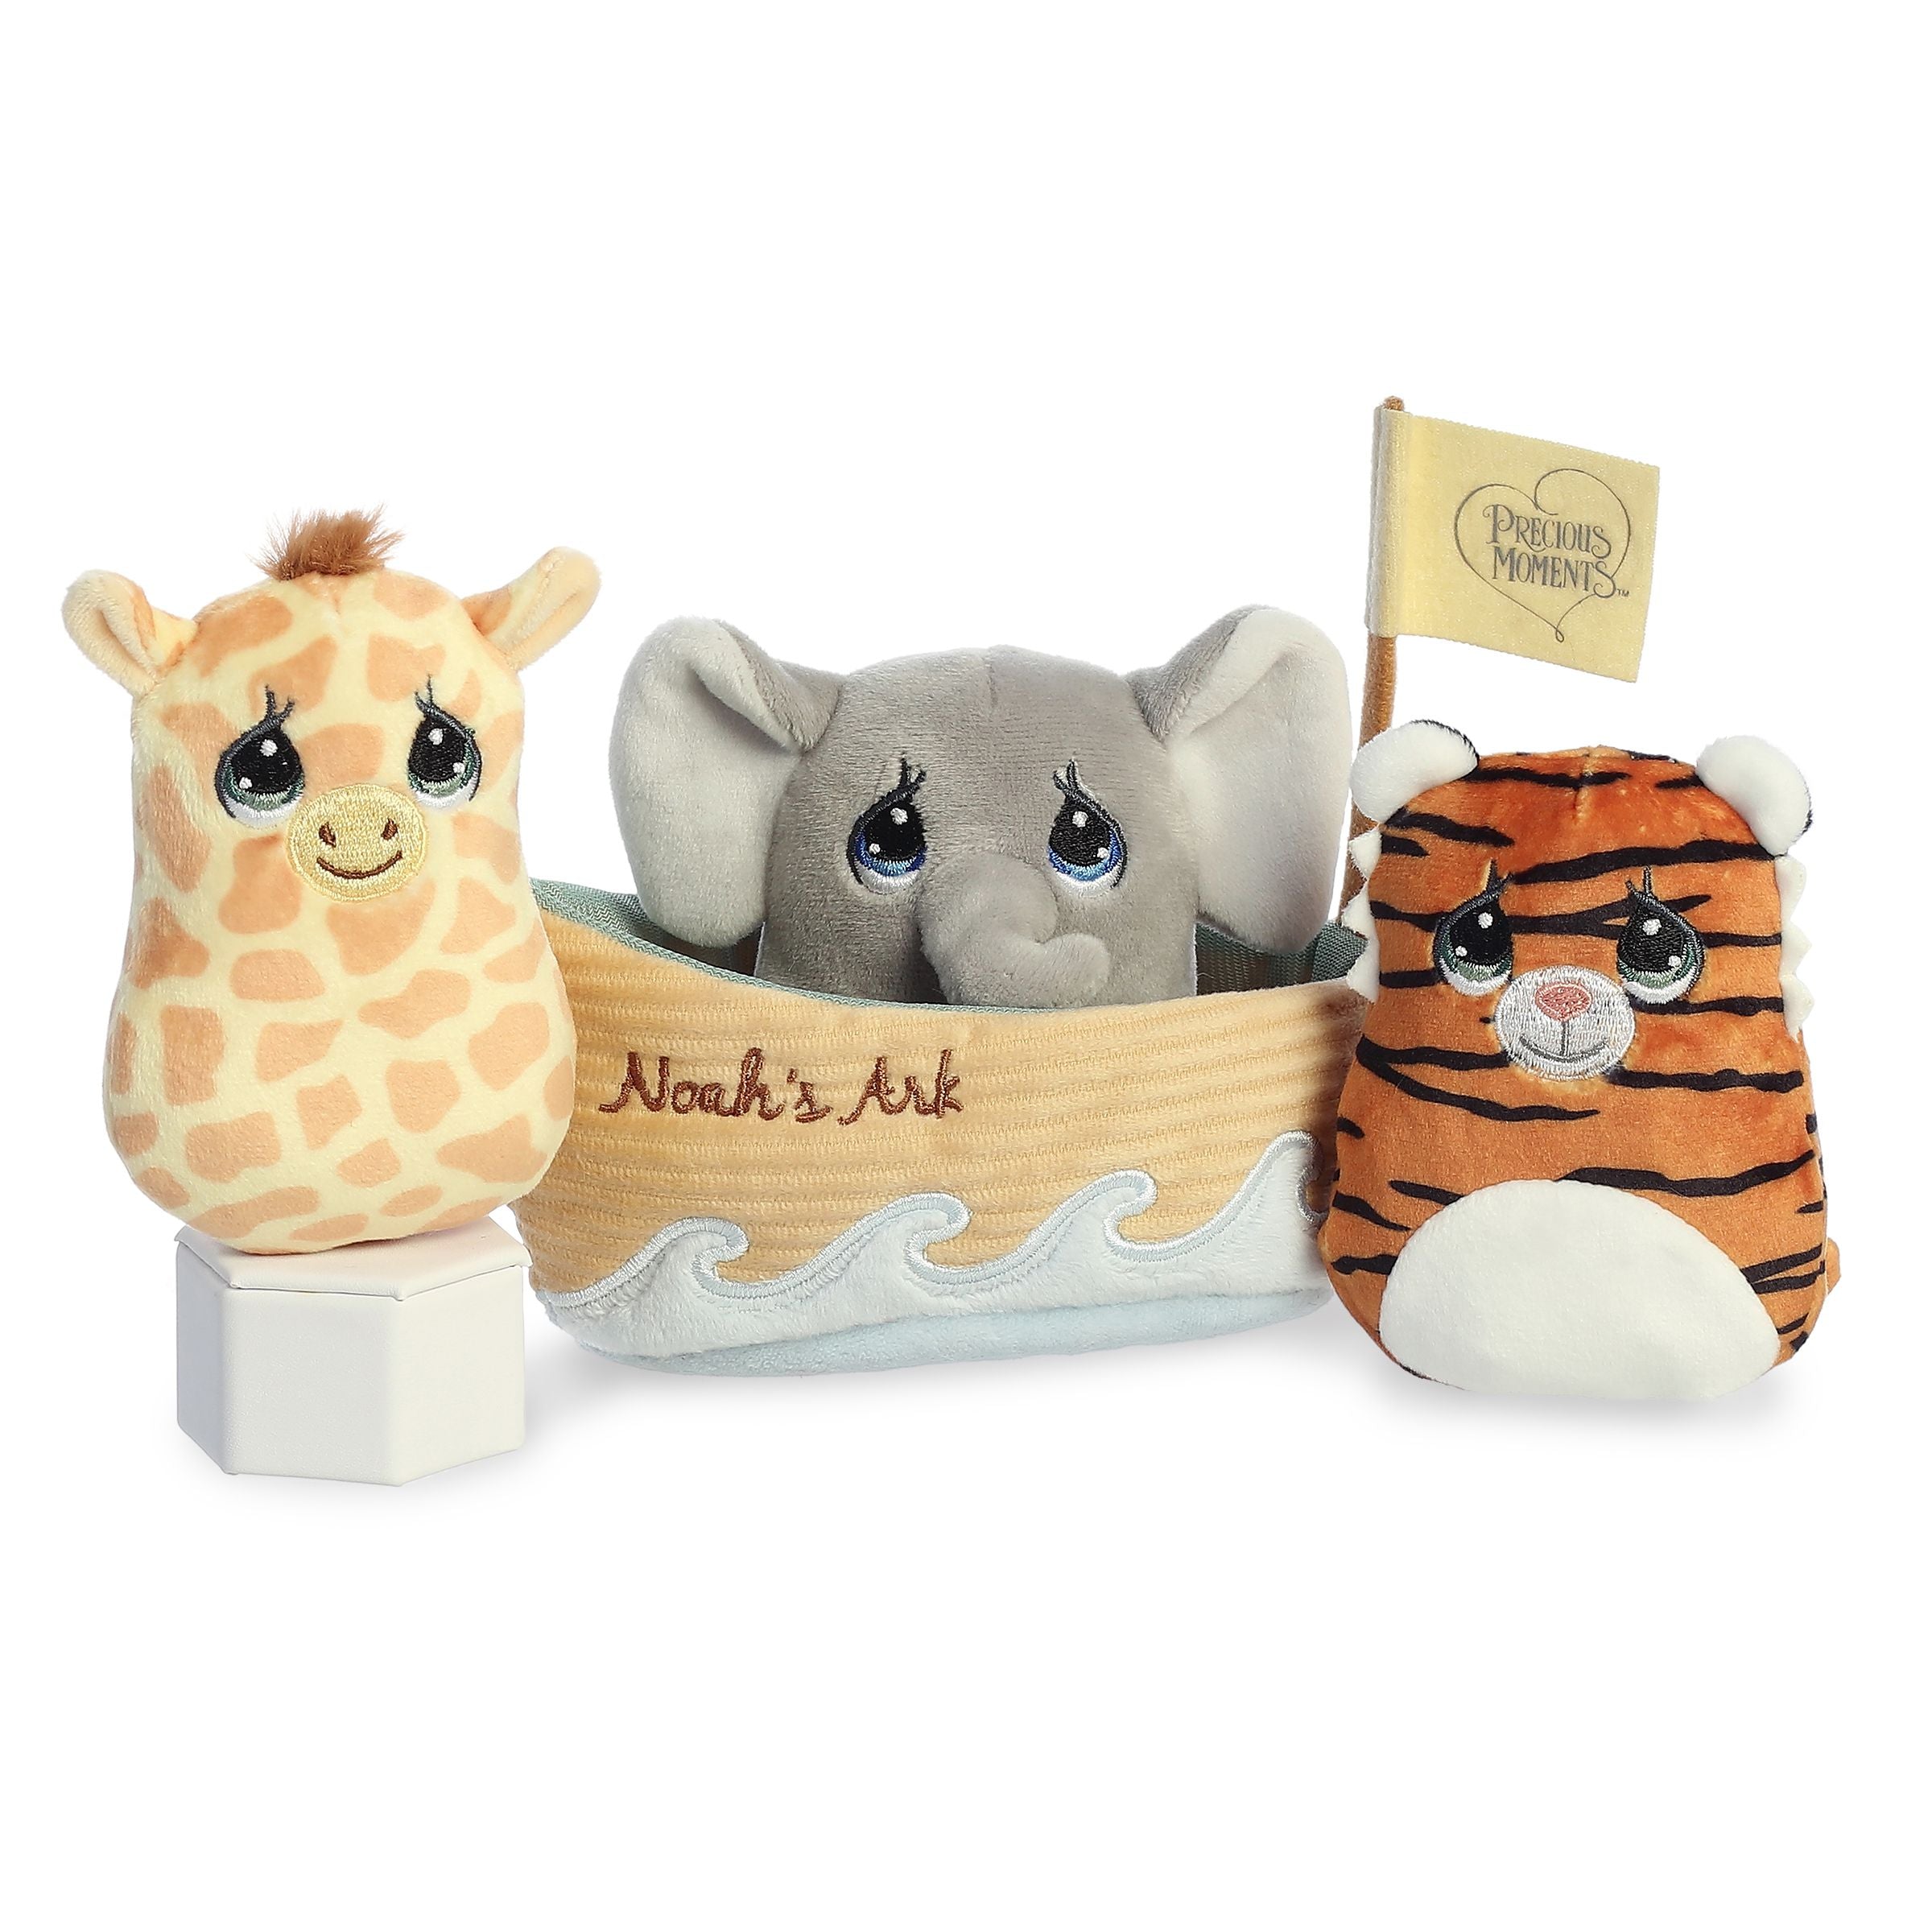 Noah's Ark Playset from Precious Moments, including plush giraffe, elephant, and tiger in a fabric ark